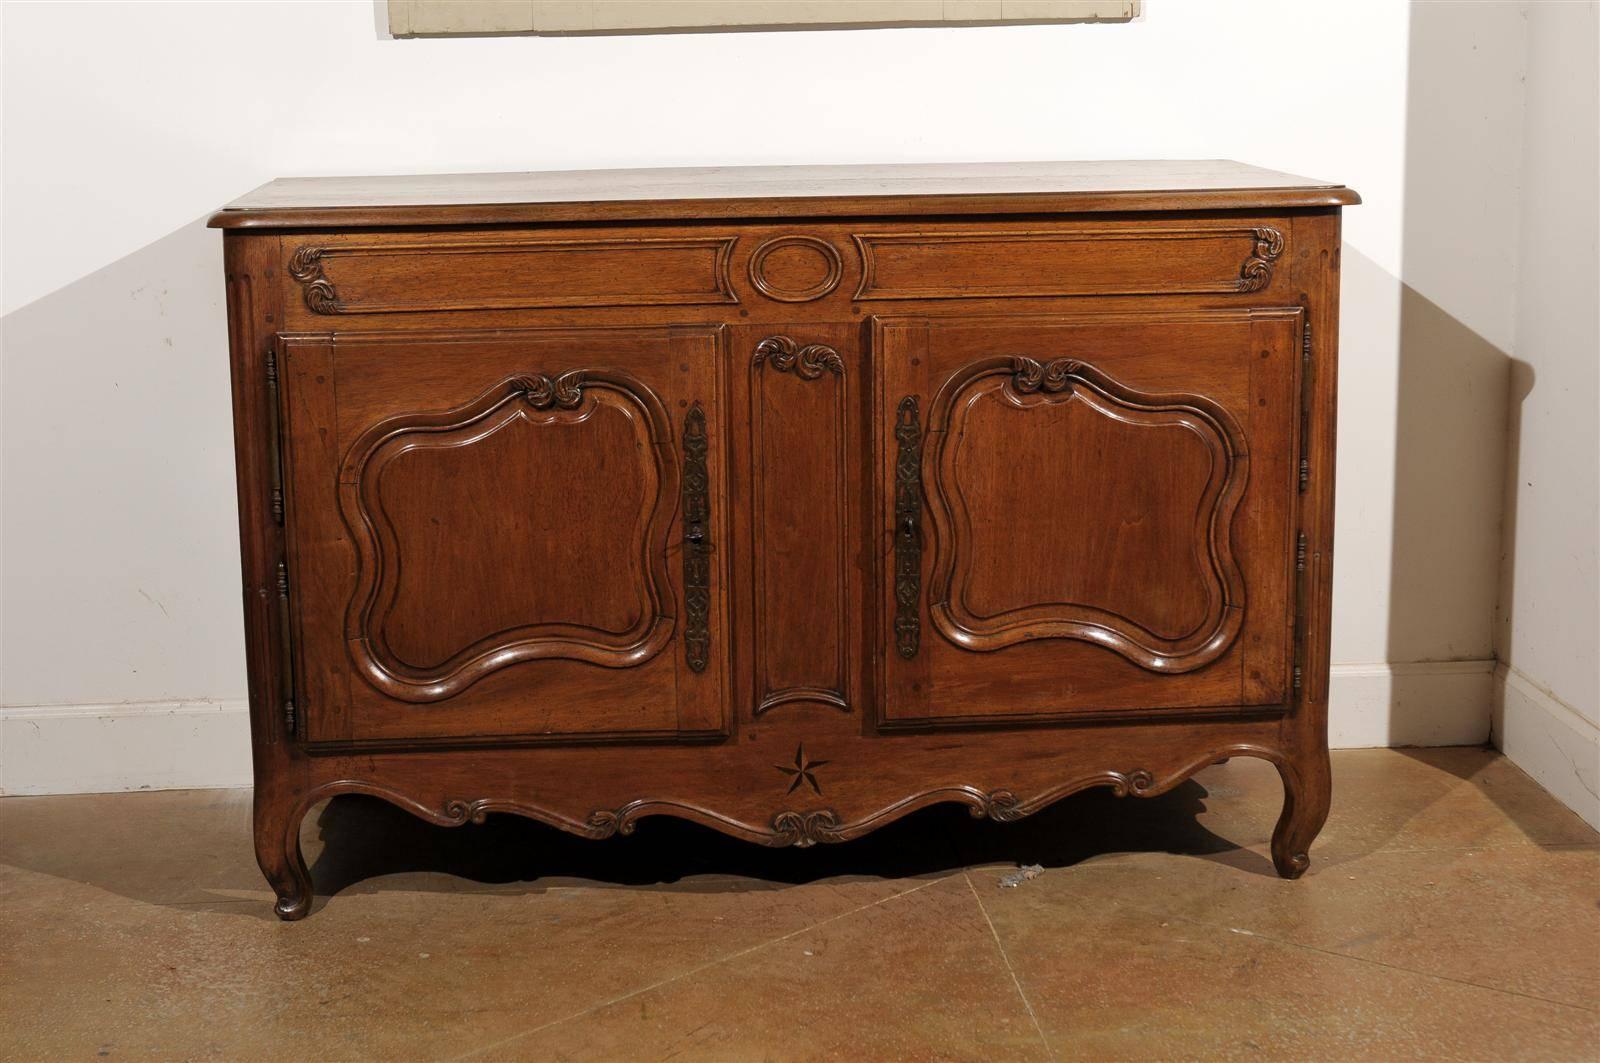 A French mid 18th century Louis XV period Provençal walnut buffet with its original hardware. This French buffet was born in the Southern region of Provence in the 1750s. This piece features a slightly raised rectangular top with rounded edges over